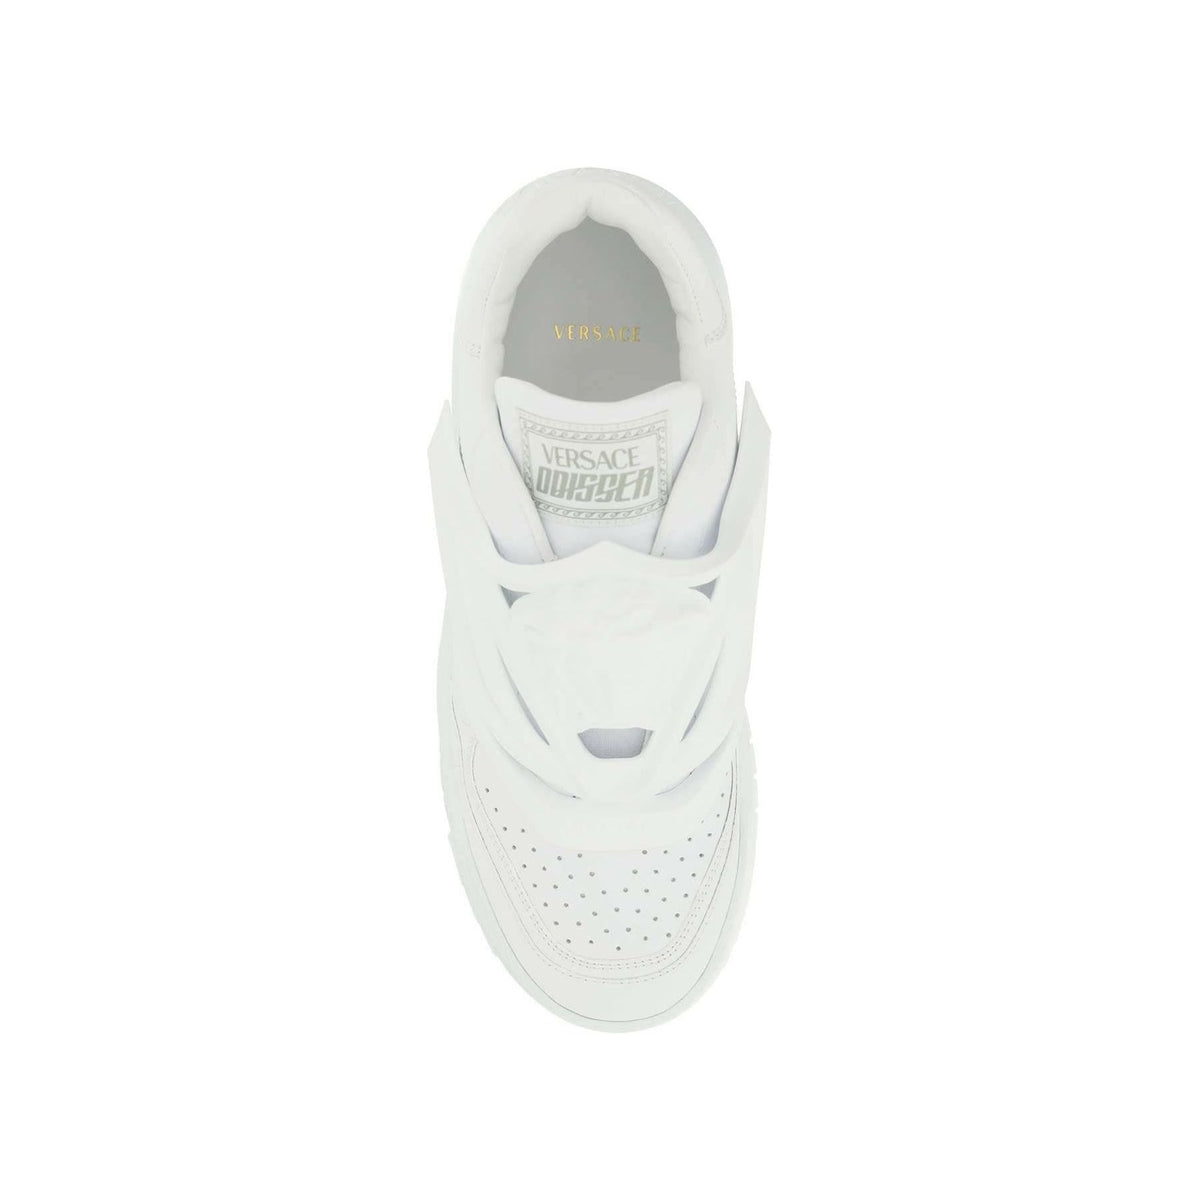 VERSACE - White Leather Odissea Slip-On Sneakers With Perforated Toe Caps - JOHN JULIA